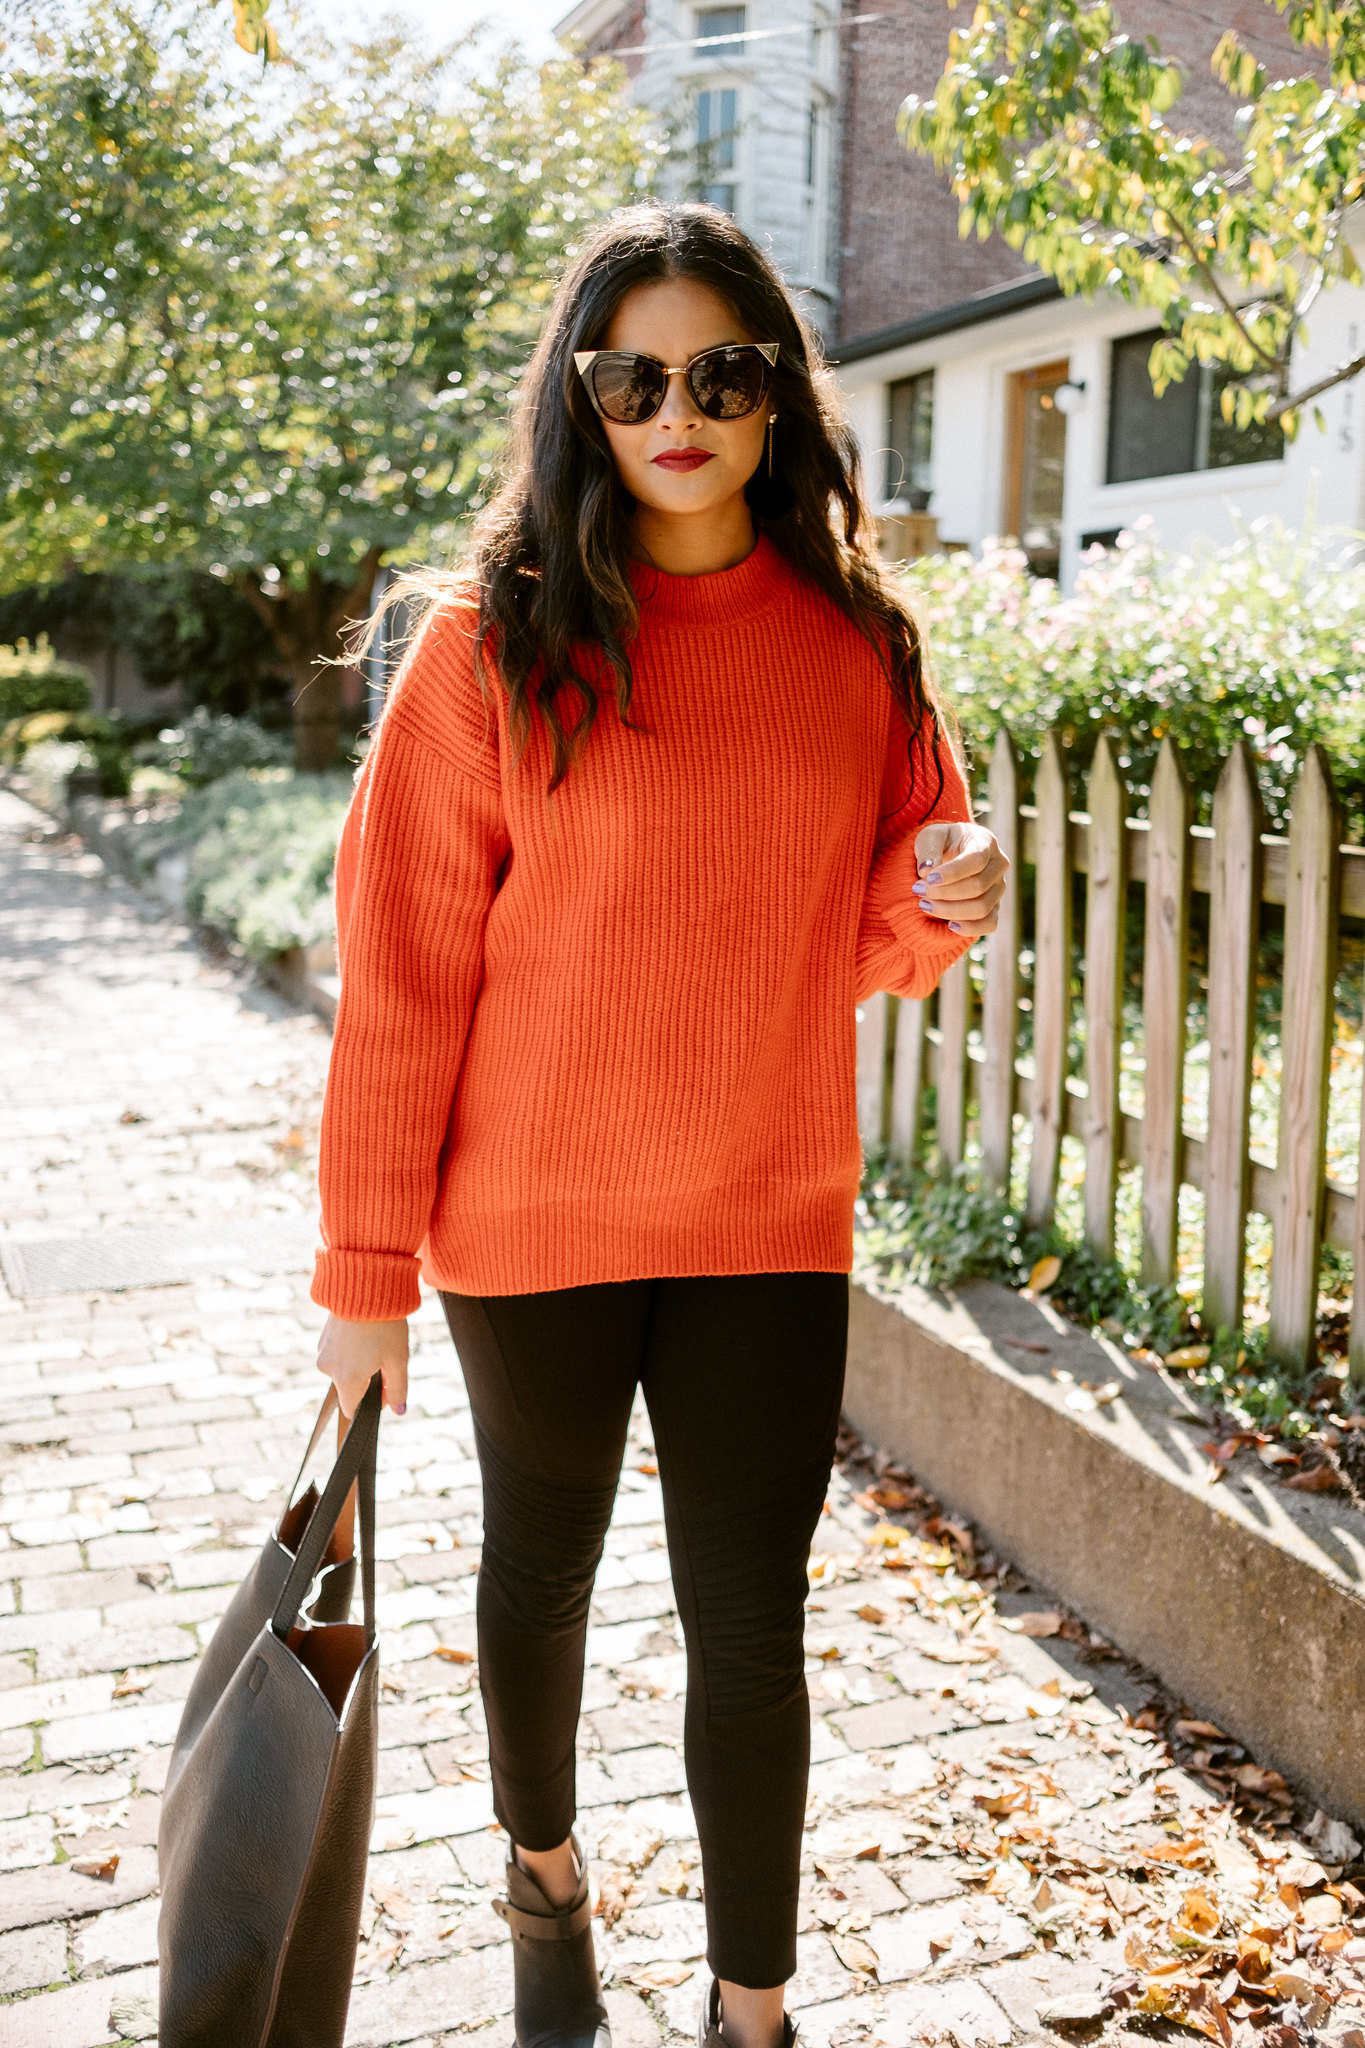 Priya the Blog, Nashville style blog, 3 Go-To Outfit Formulas for Fall, Fall fashion, outfit formulas, Fall outfit ideas, Sweater top, vintage denim jacket, oversized sweater, Zara leggings, 